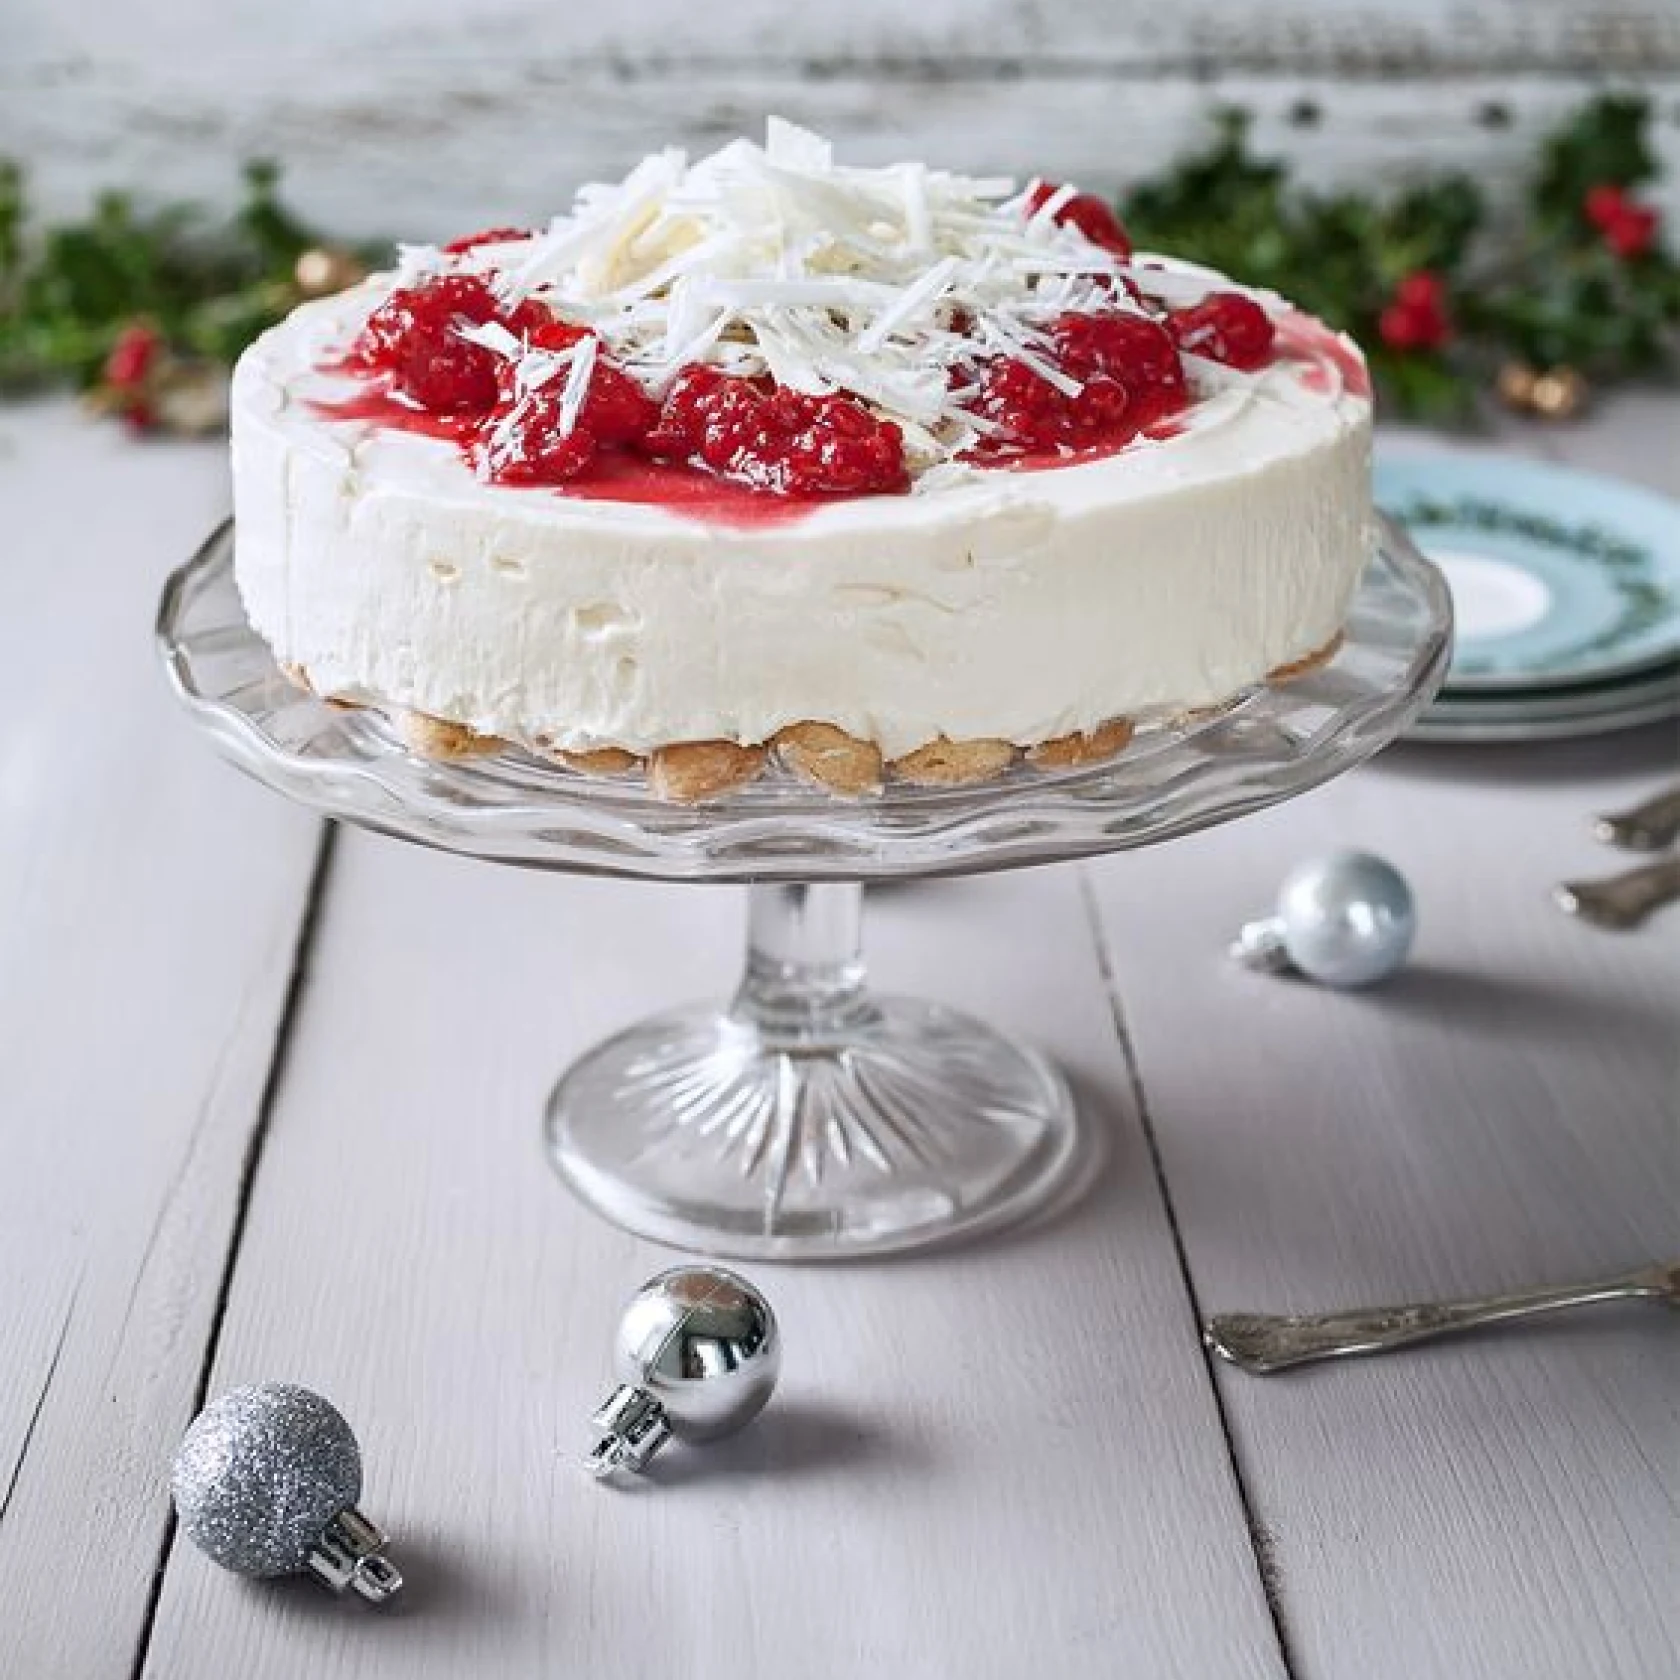 A cheescake covered in strawberries and shave coconut sits on a glass cake stand 